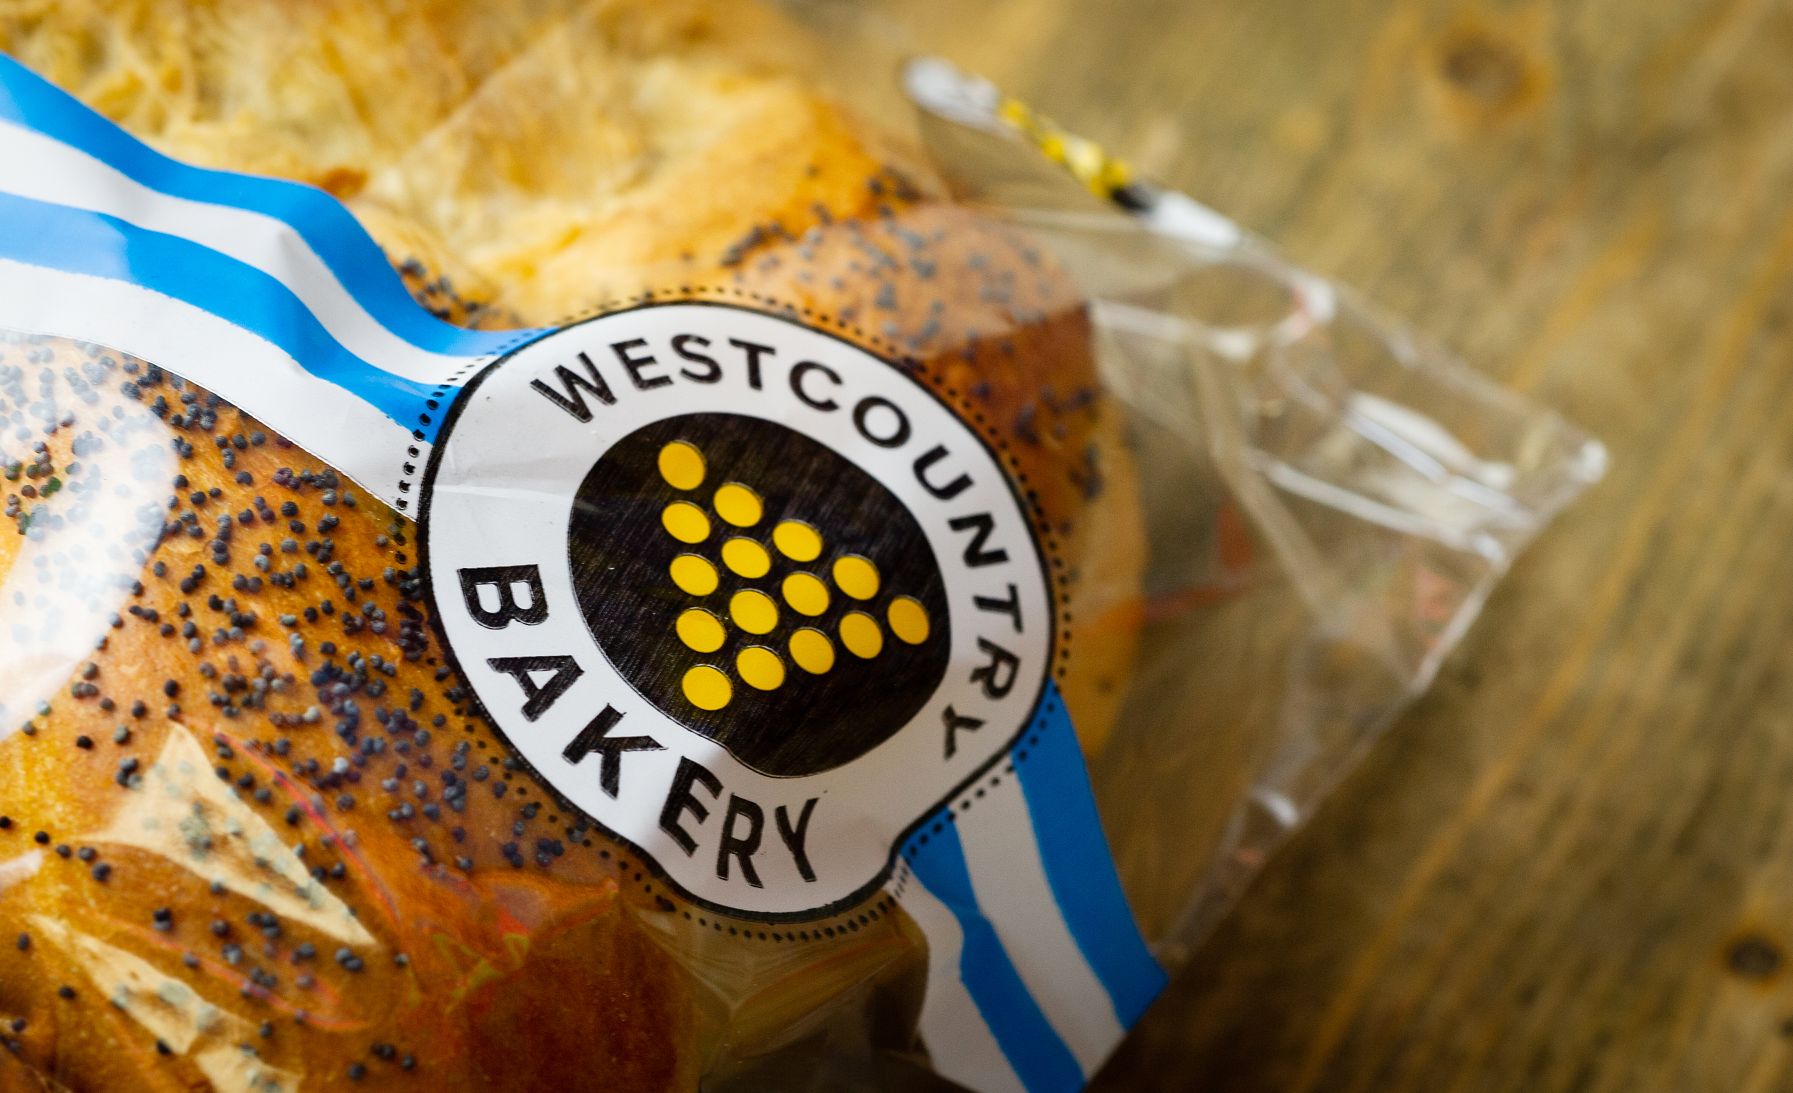 Bakery: Bread (Westcountry)- Large white twist (subscription)